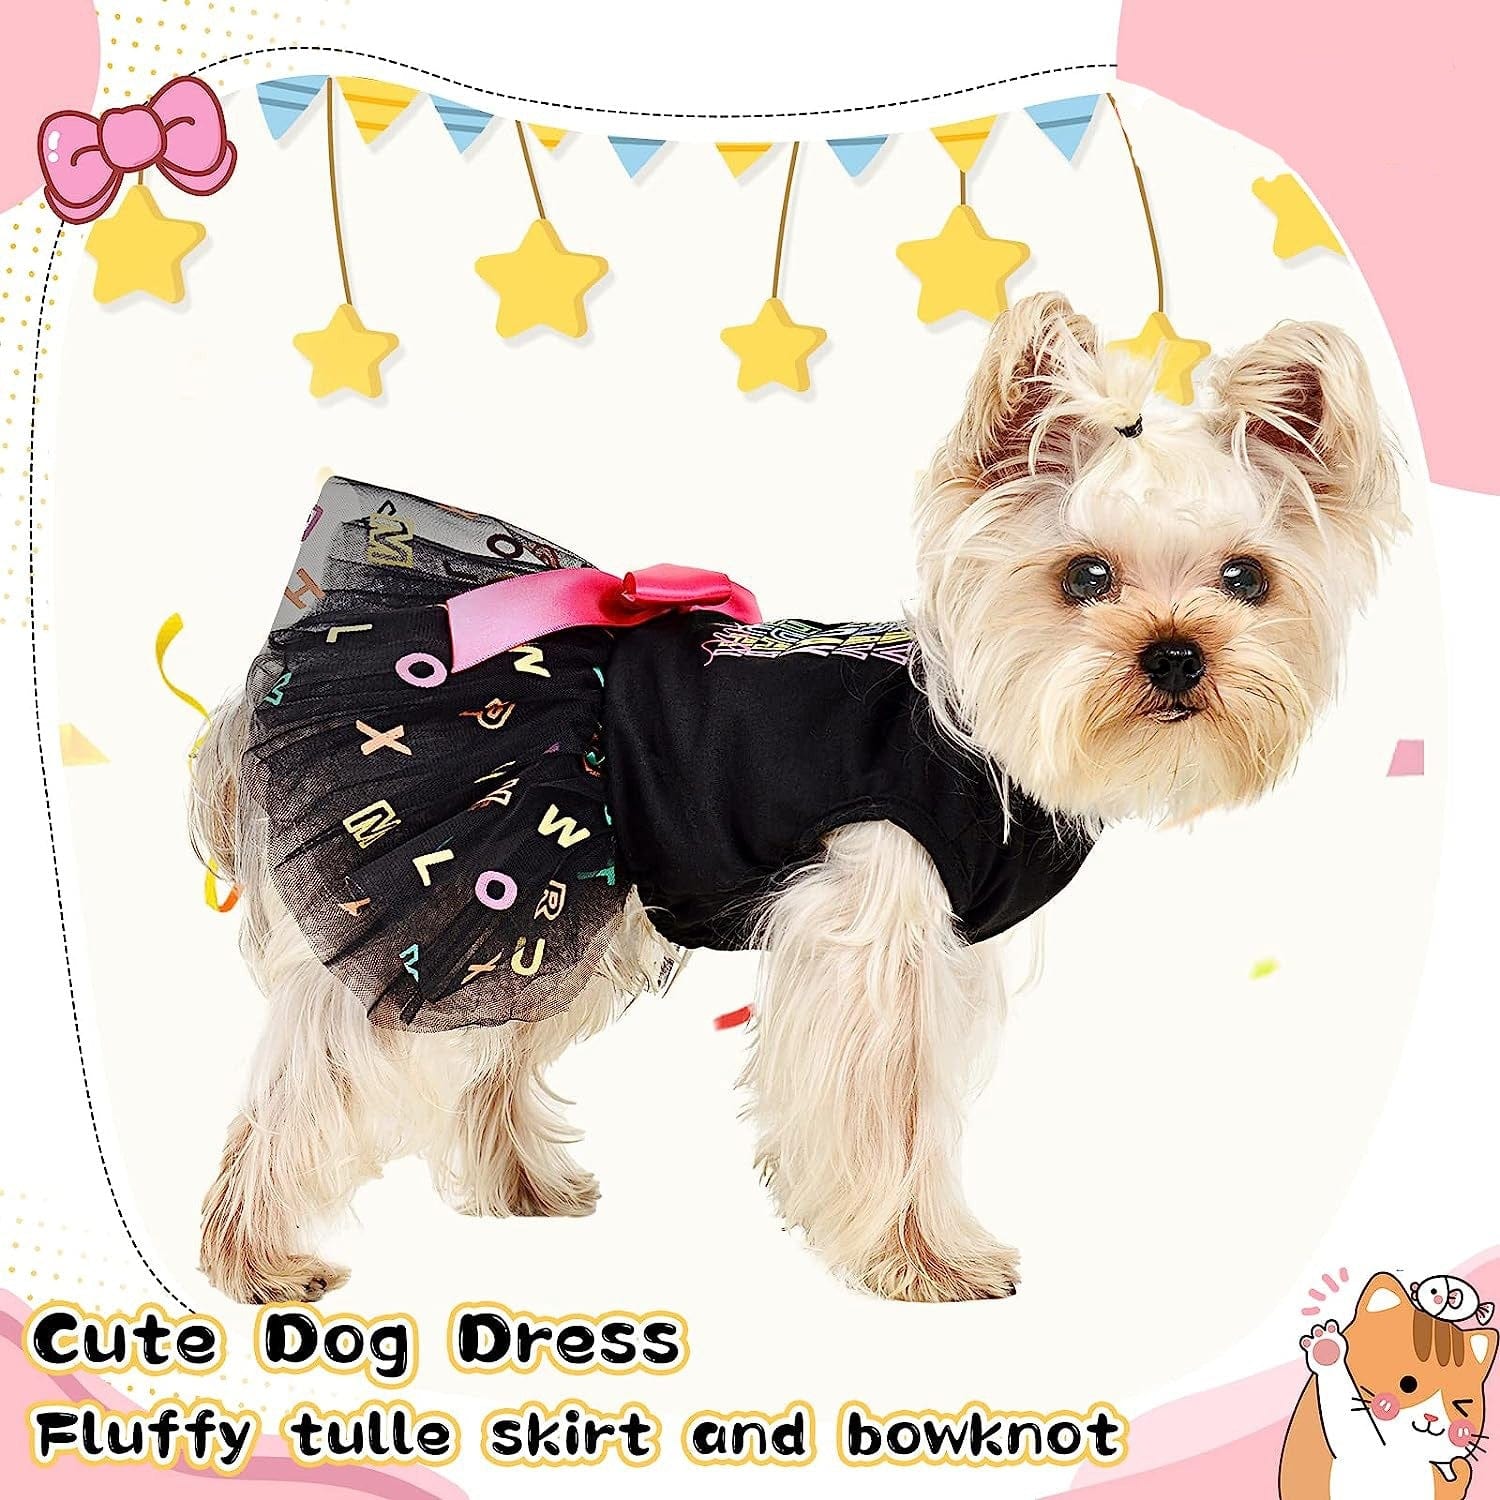 Buy KUTKUT Frock Dress for Small Dog Girl Puppy Clothes Female Princess  Tutu Striped Skirt Summer Shirt for Shihtzu, Pug Cat Pet Apparel Outfits ( Size: XL, Chest: 50cm, Length: 40cm) Online at